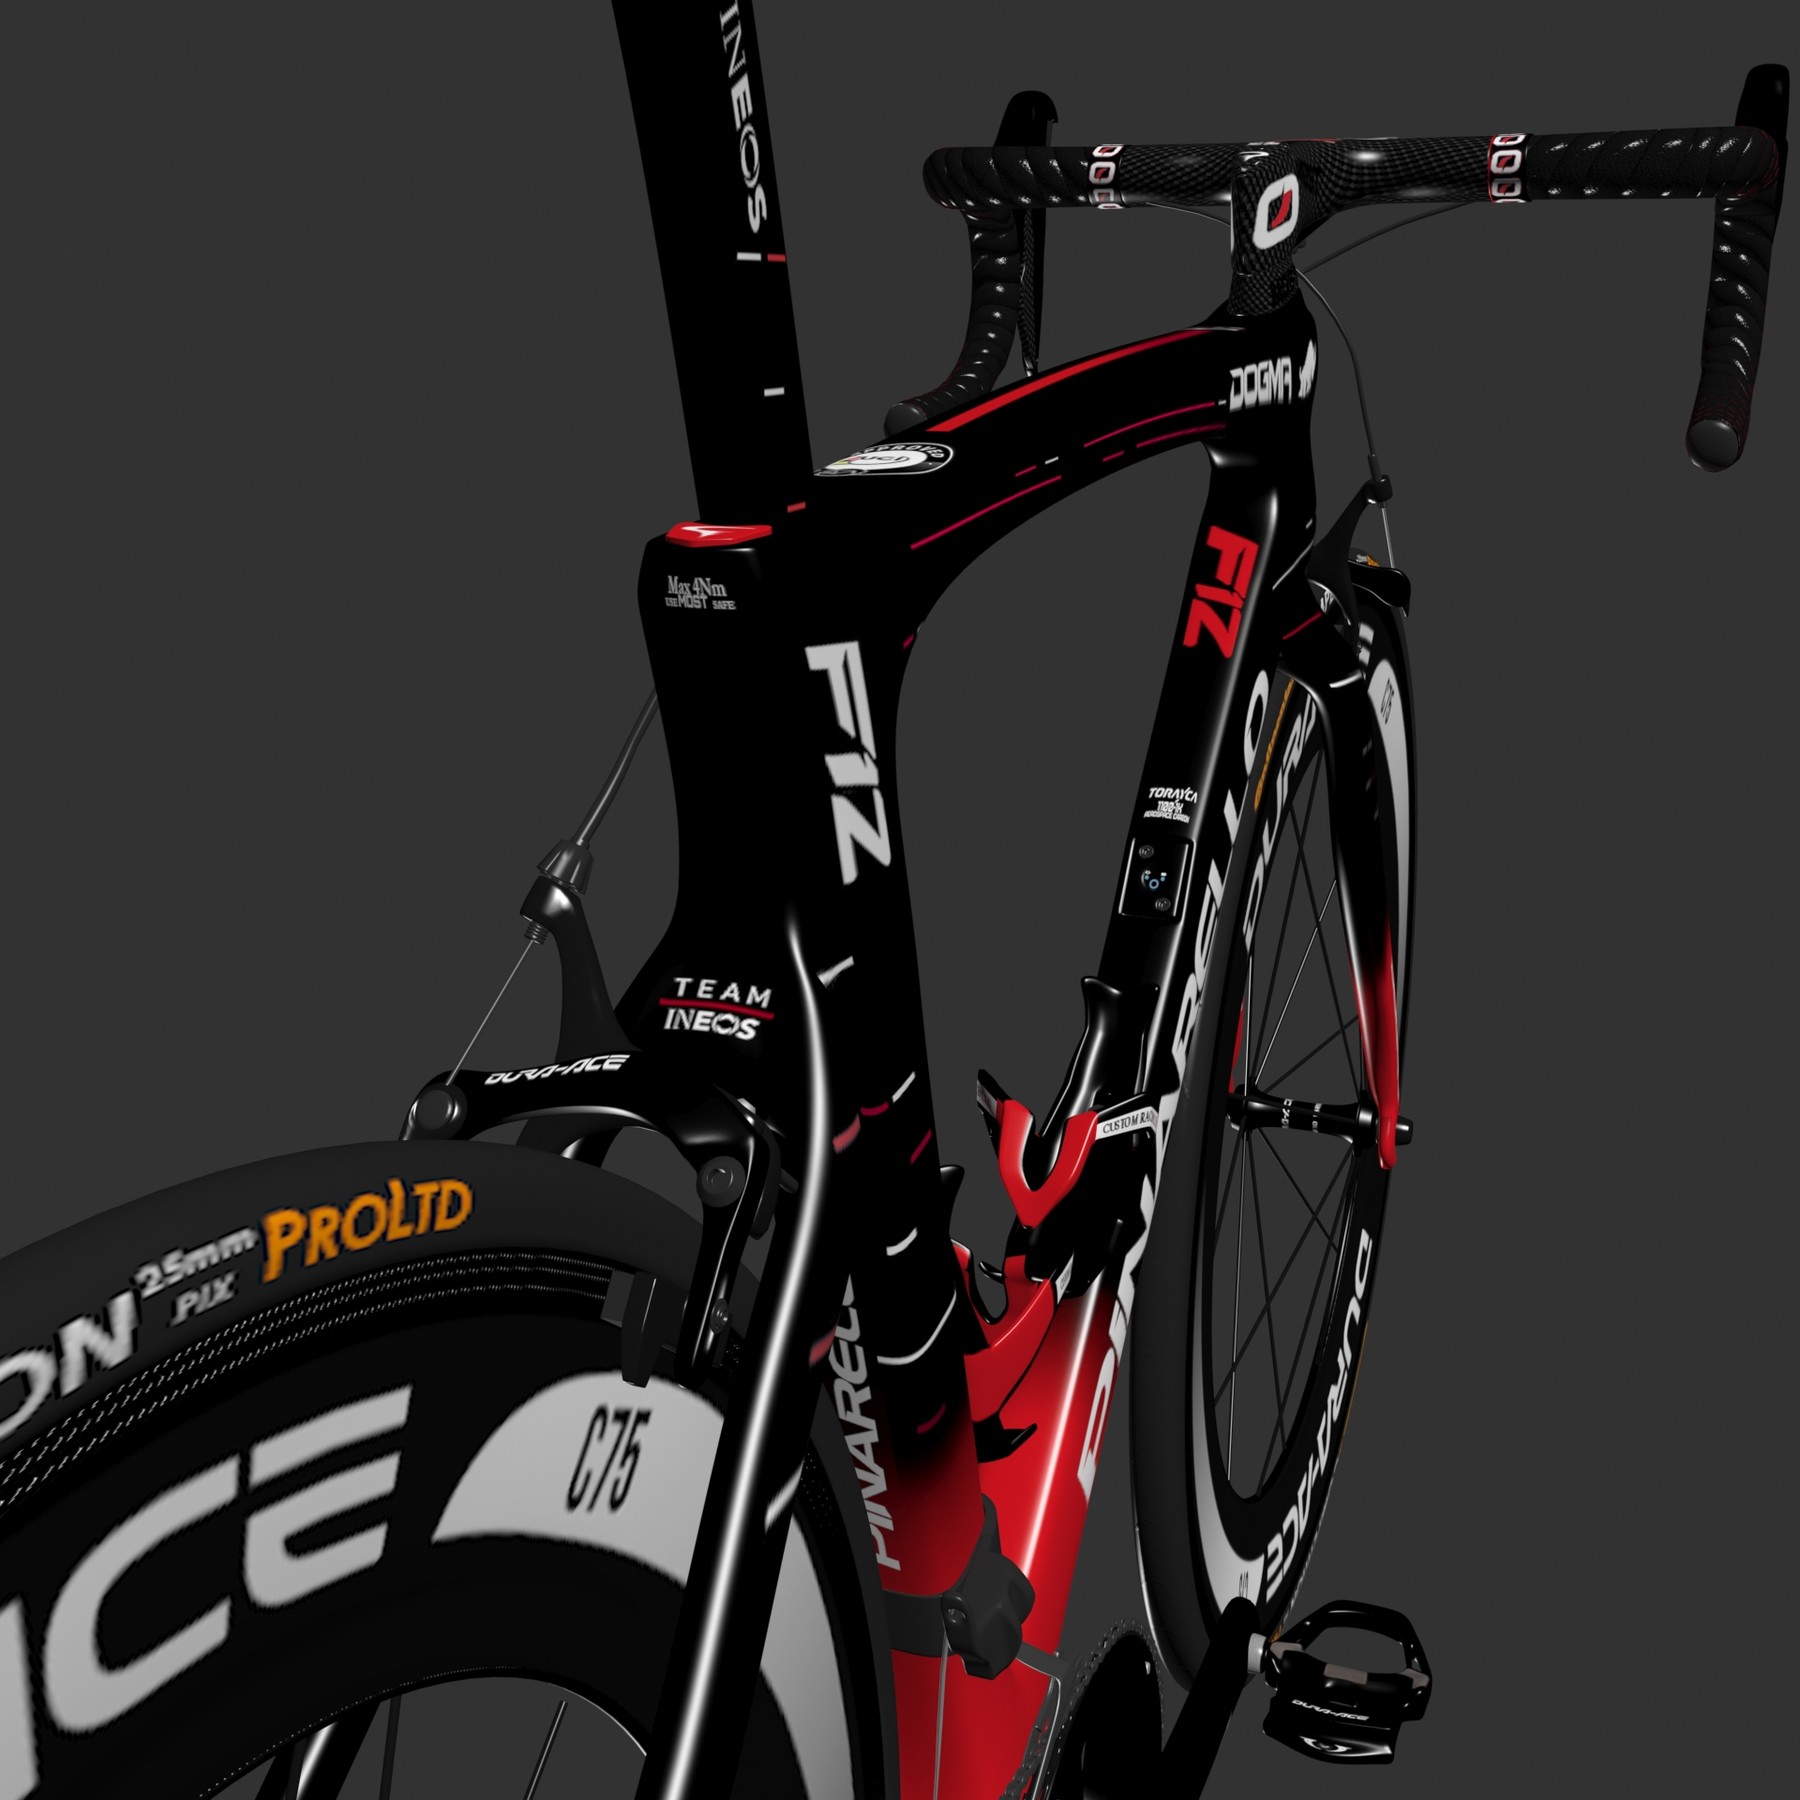 Pinarello Dogma F12 preview: 'Beyond the reach – and wallets – of mortals', Technology